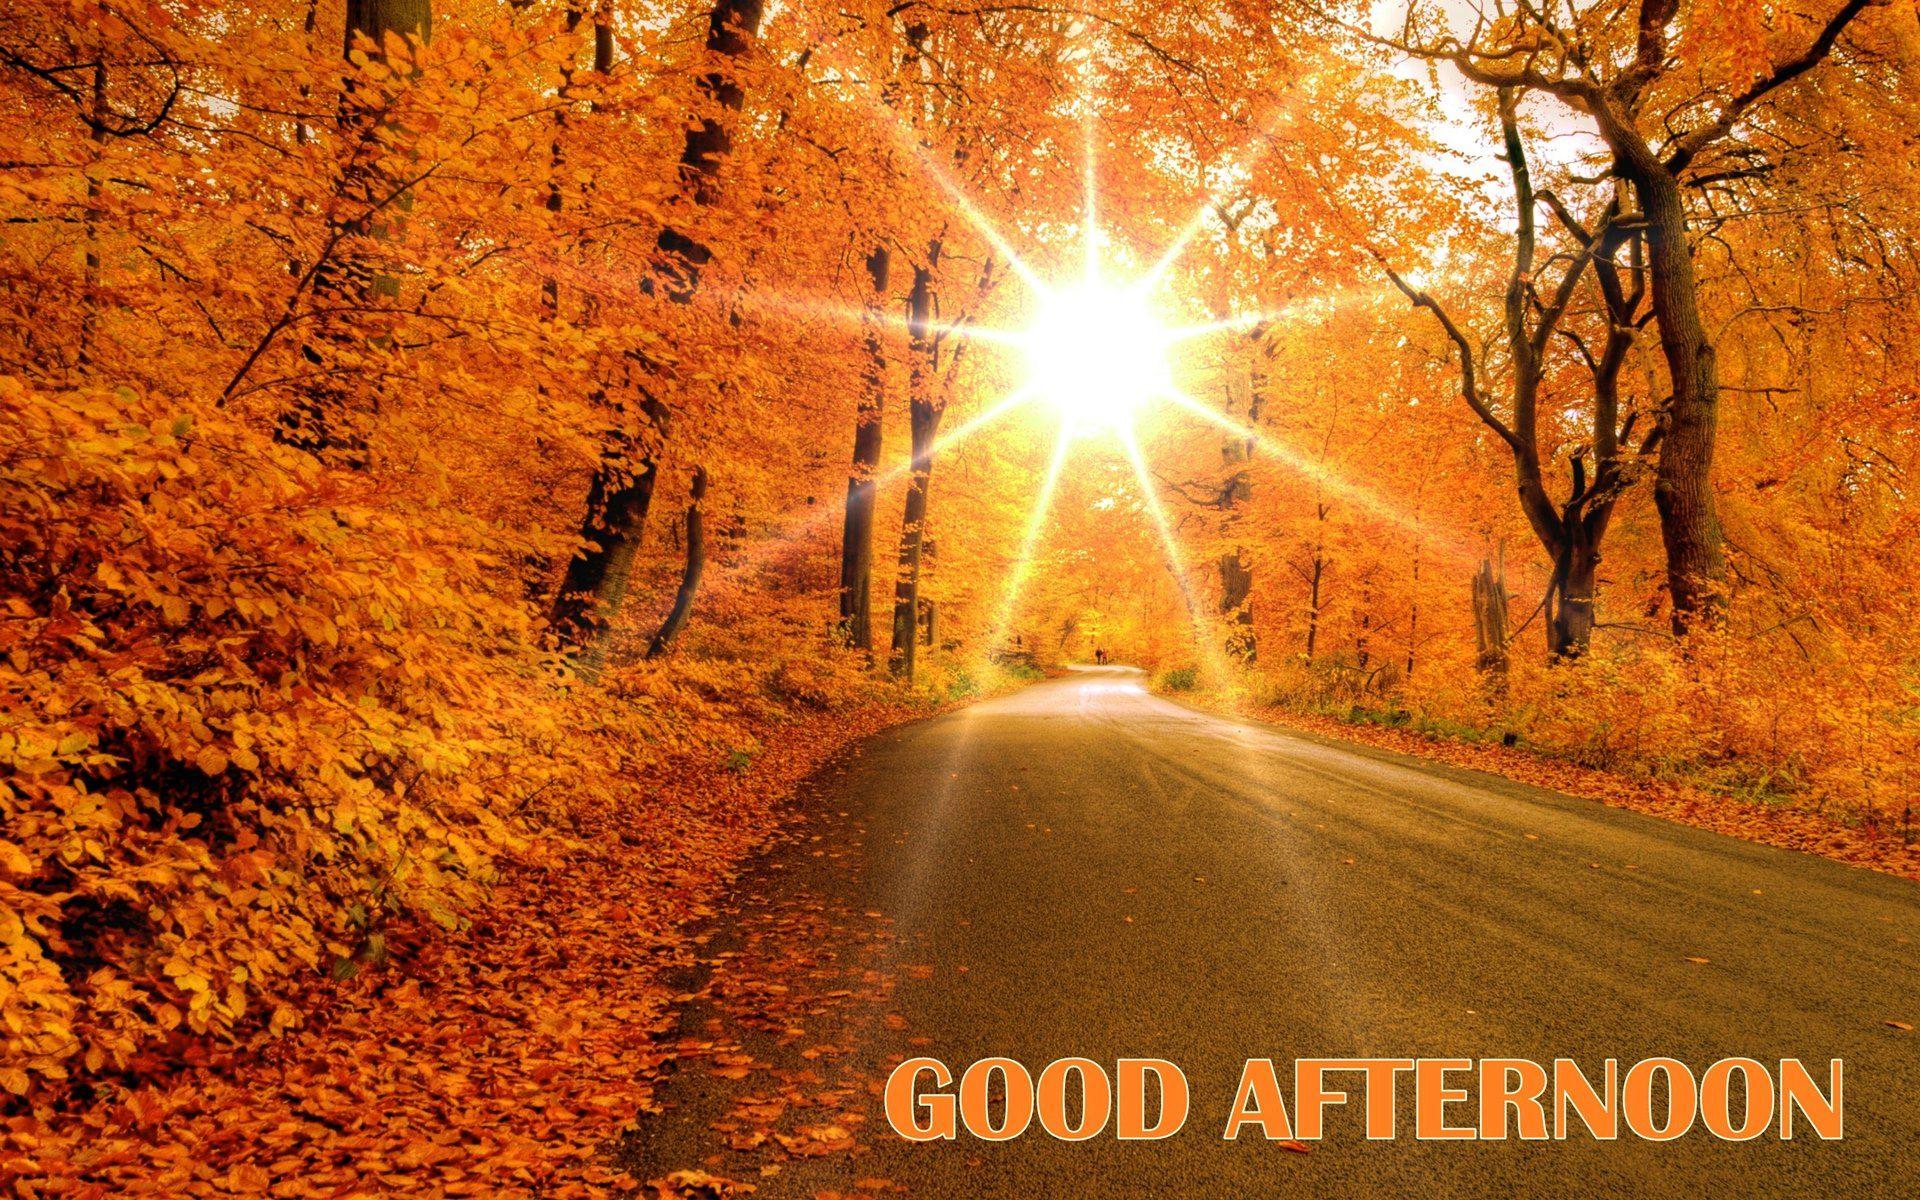 Best good afternoon wallpaper free download, Good afternoon image